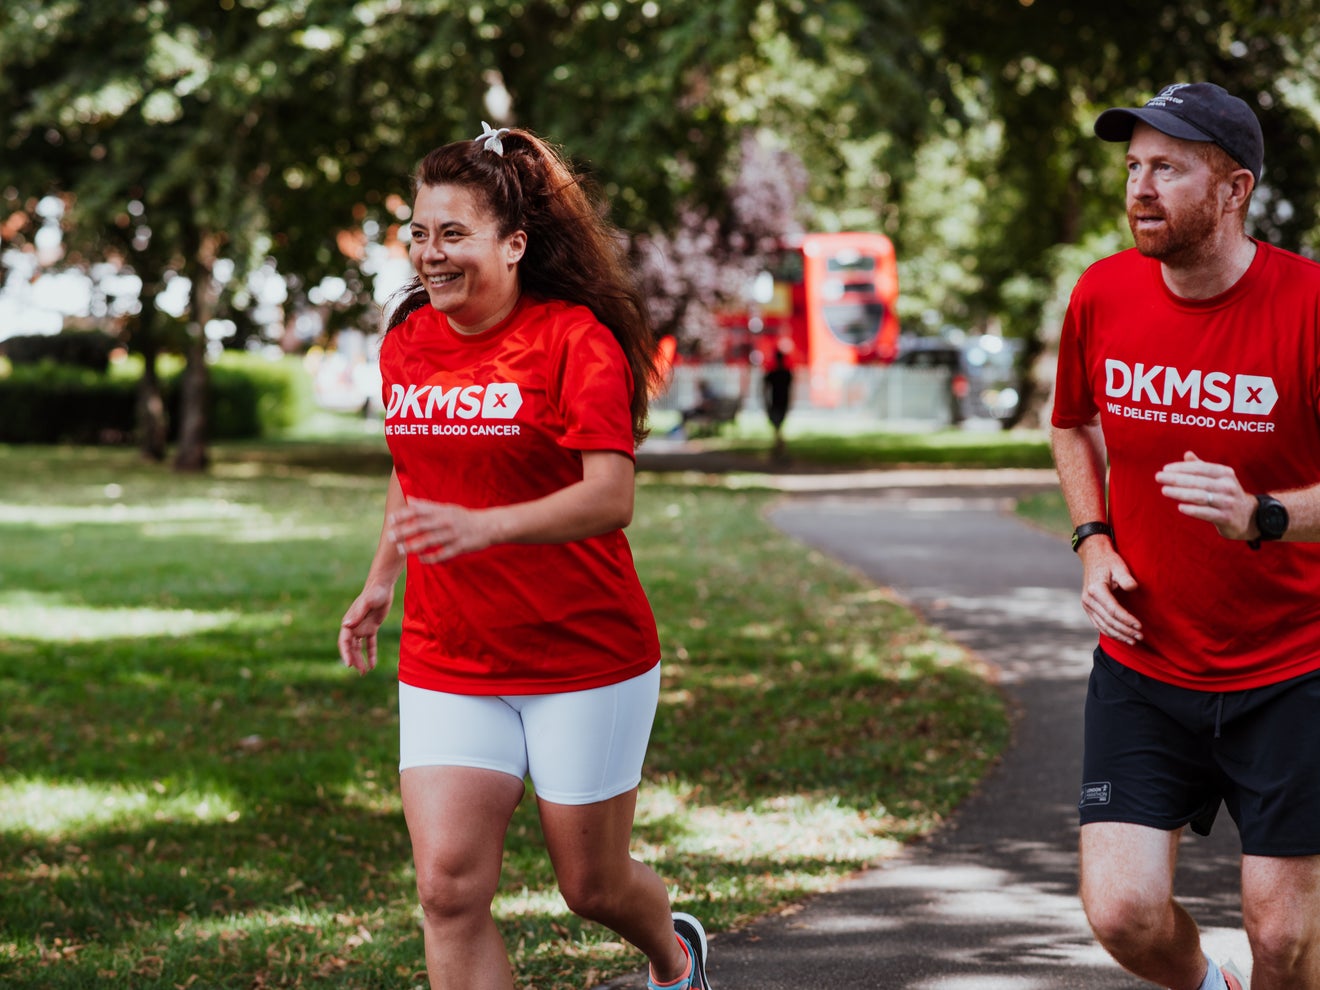 Image of two people running in DKMS t-shirts